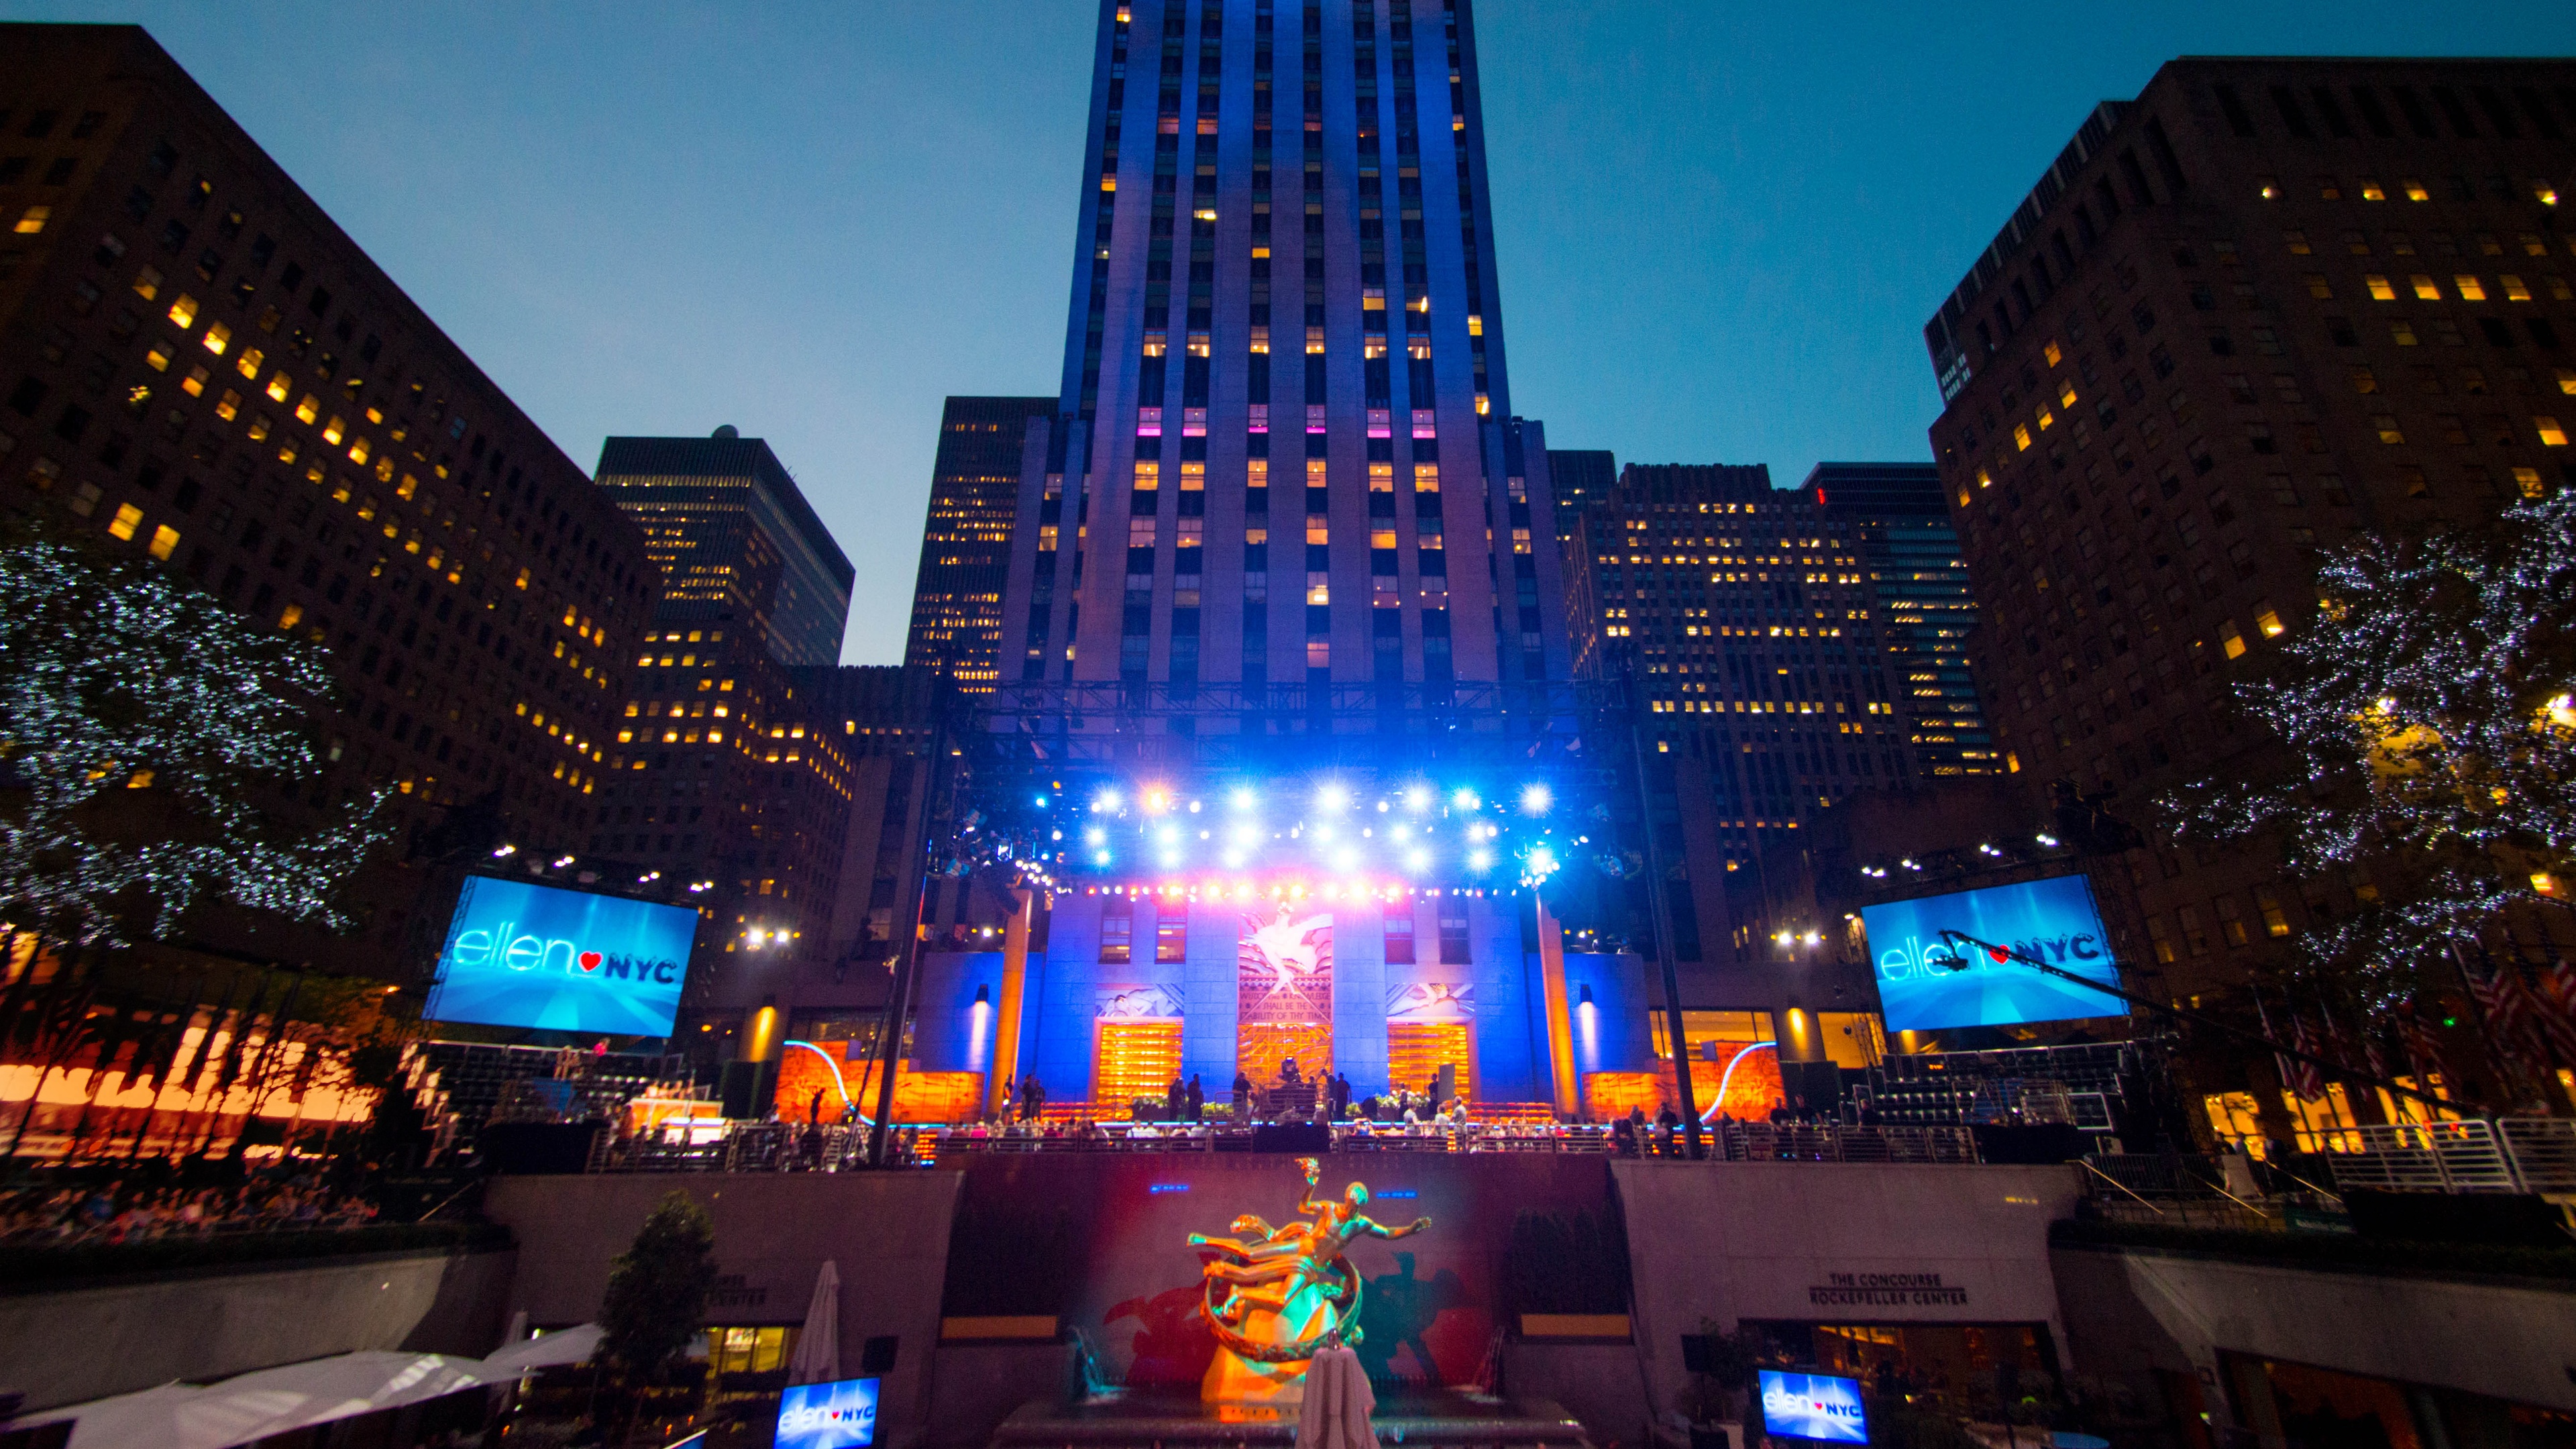 Rockefeller Center NYC lit up with a stage and lights